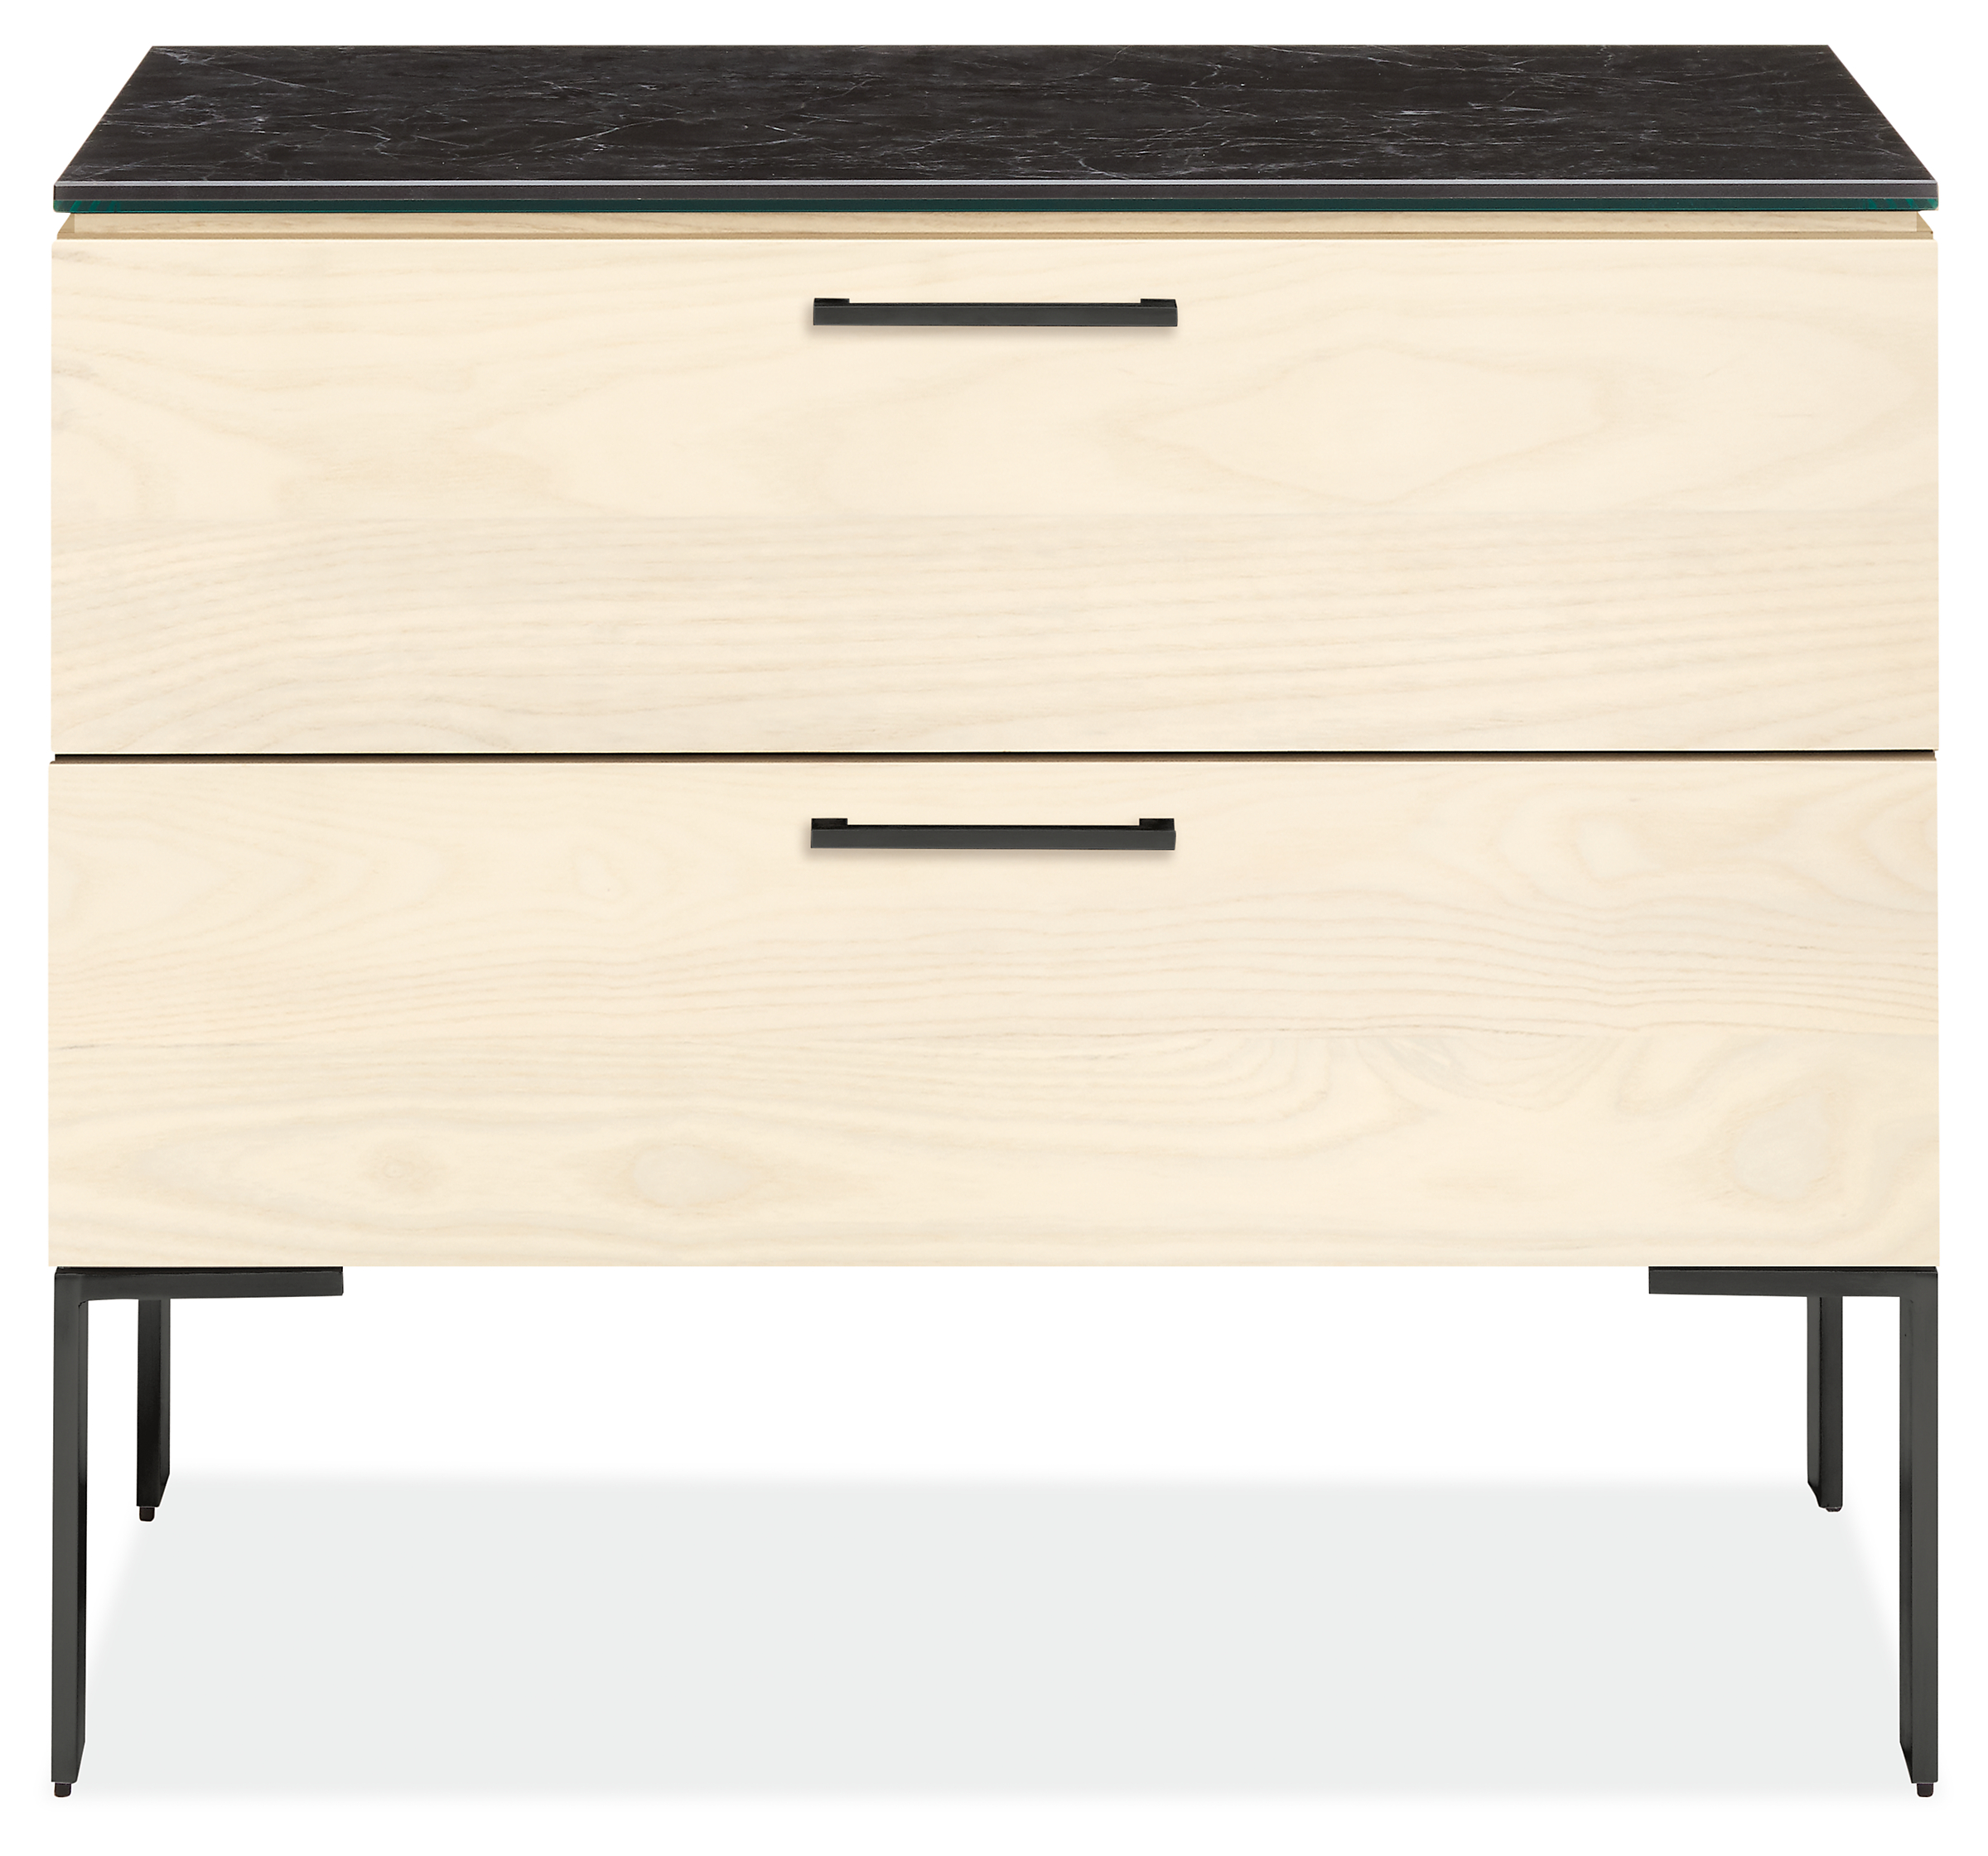 Kenwood 26w 20d 22h Two-Drawer Nightstand with Ceramic Top